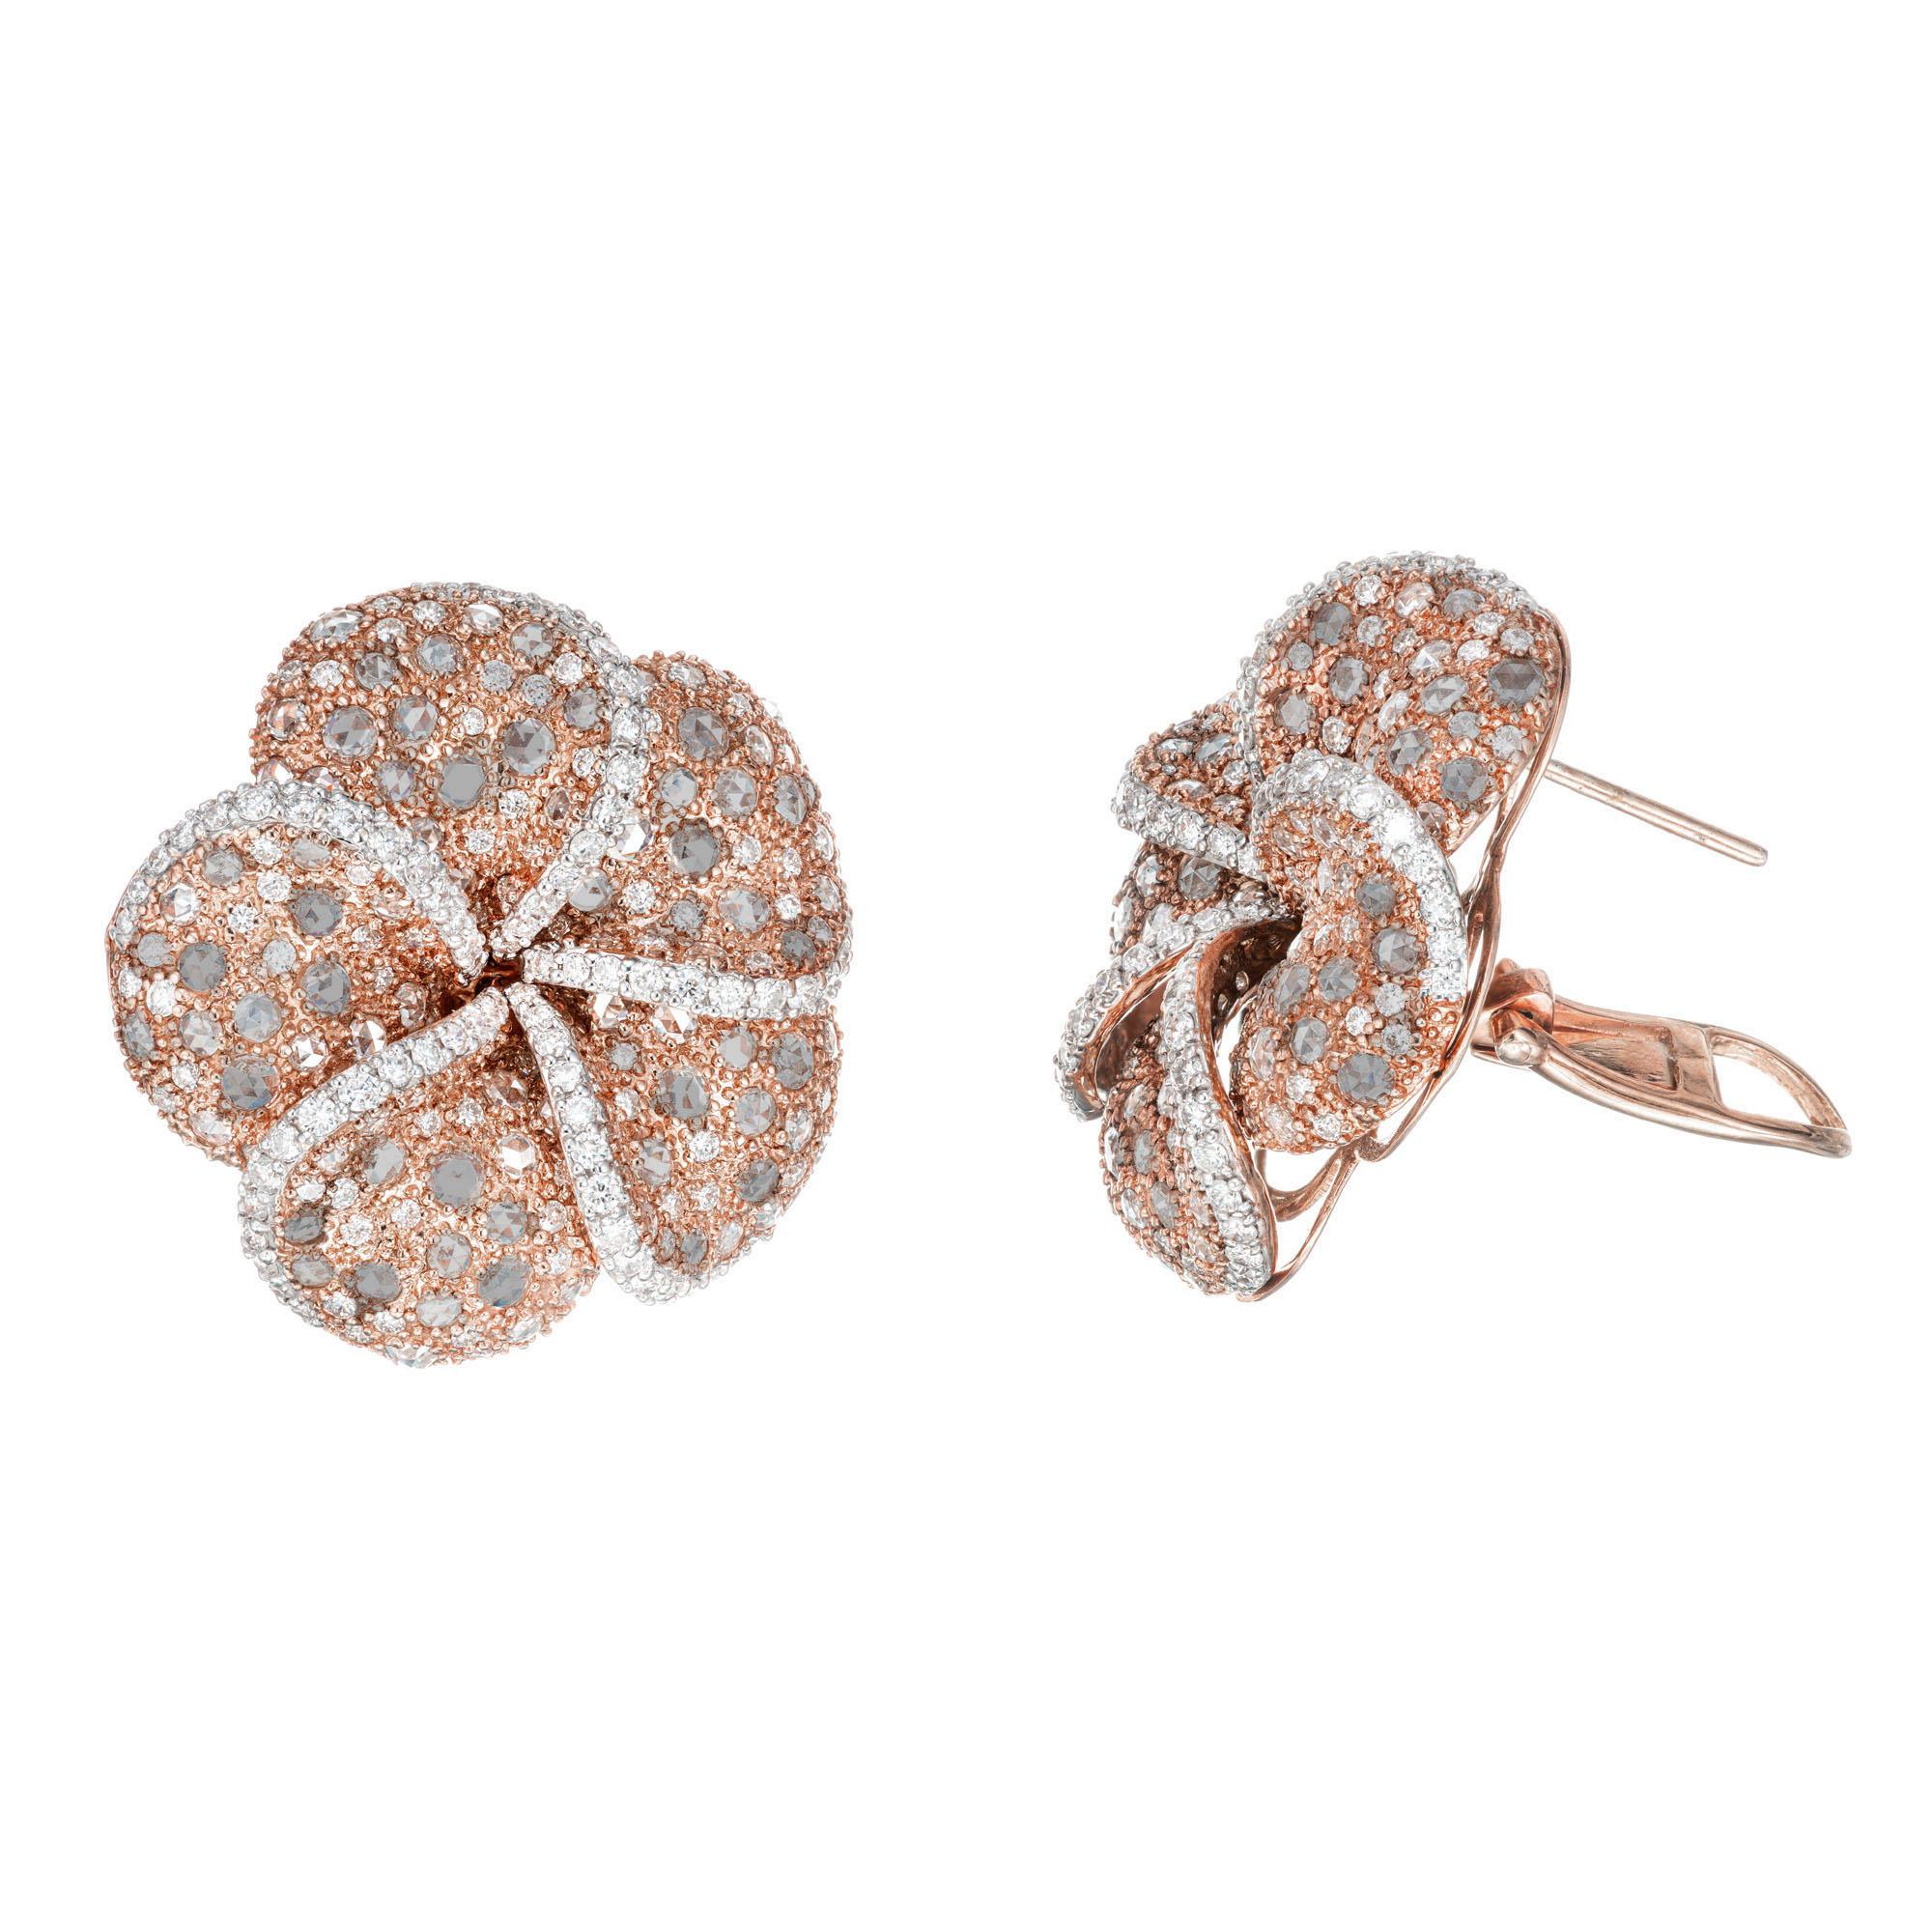 5 Carat Round Rose Cut Diamond Rose Gold Clip Post Flower Earrings In Excellent Condition For Sale In Stamford, CT